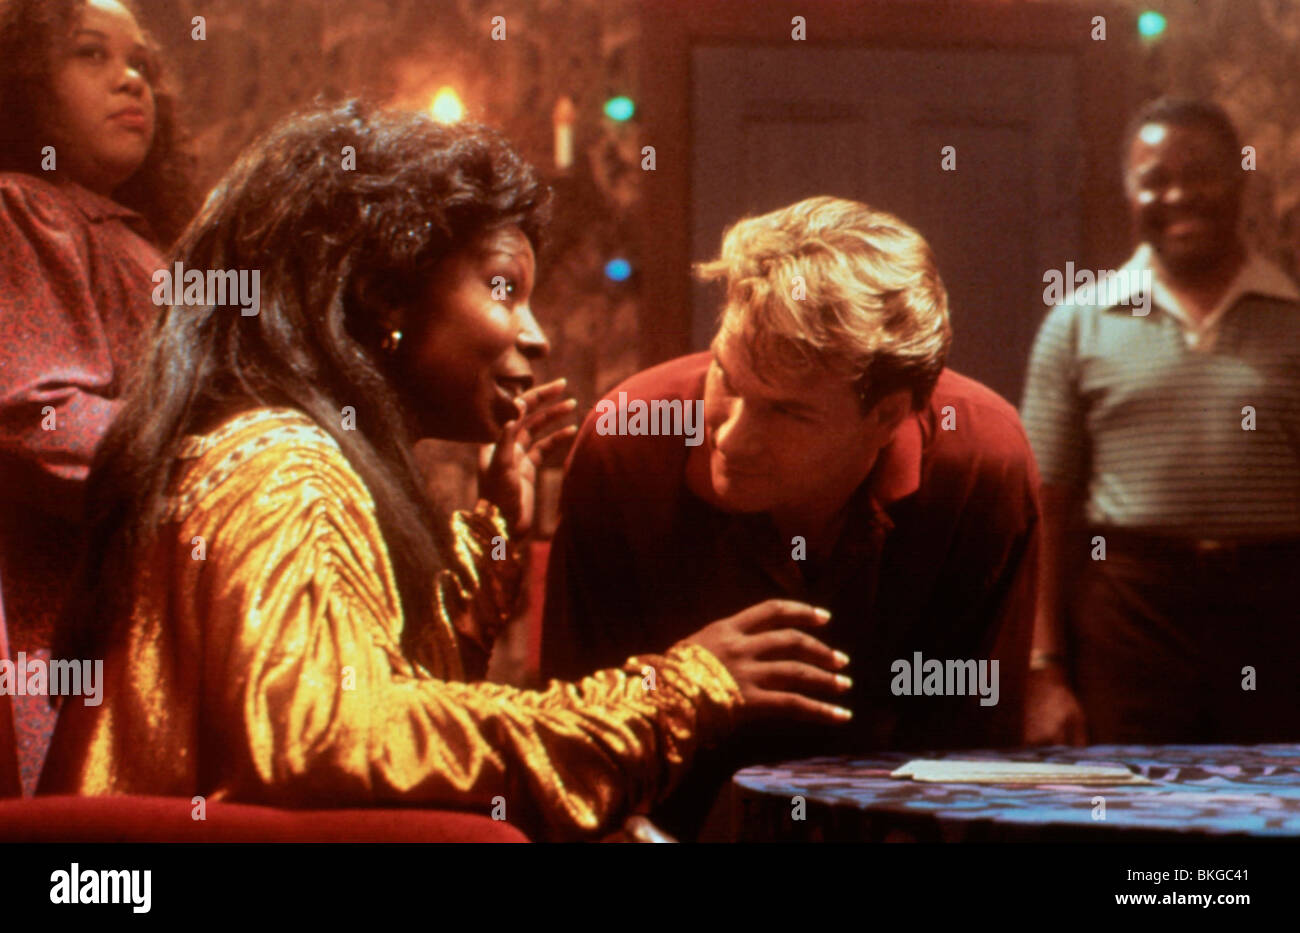 GHOST (1990), Whoopi Goldberg, PATRICK SWAYZE SGH 006 Banque D'Images